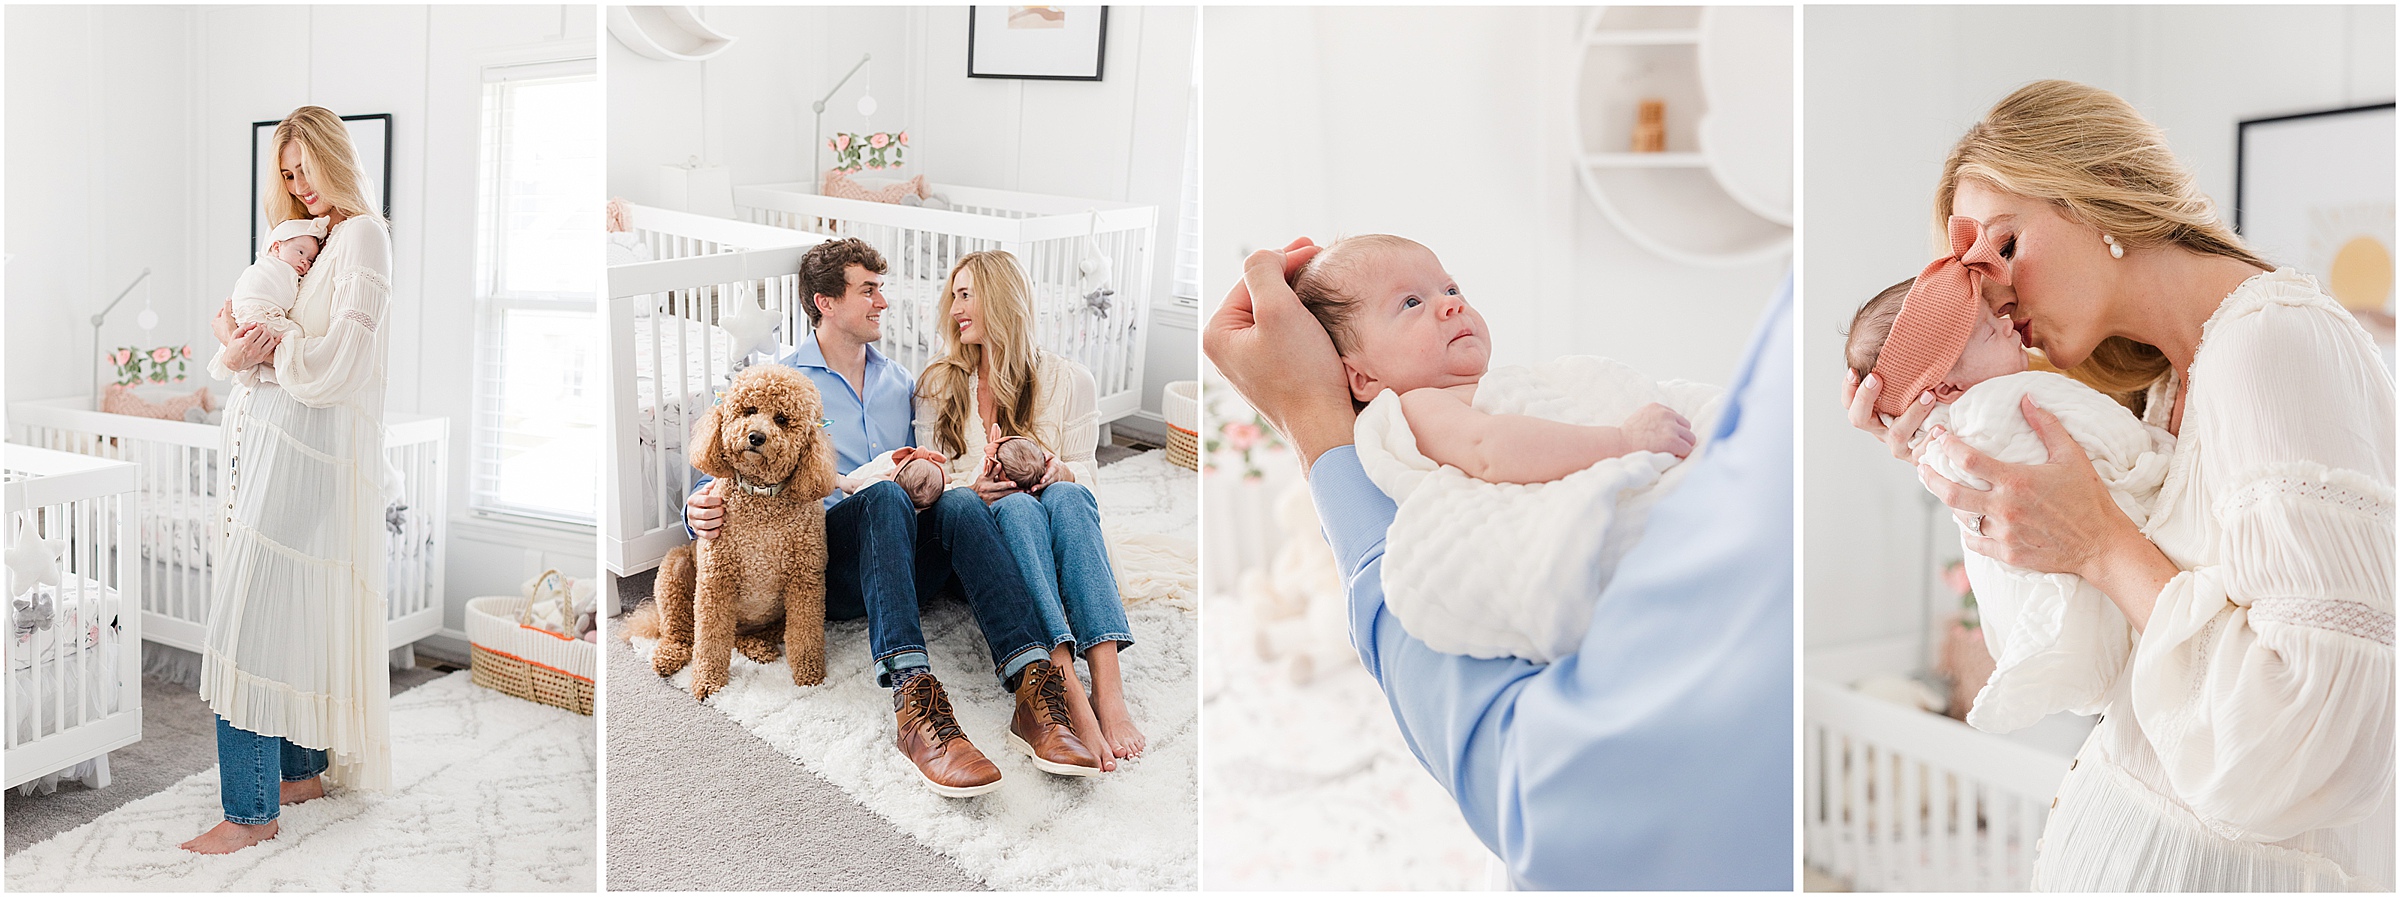 Indianapolis lifestyle newborn photographer specializing in at home family sessions. 